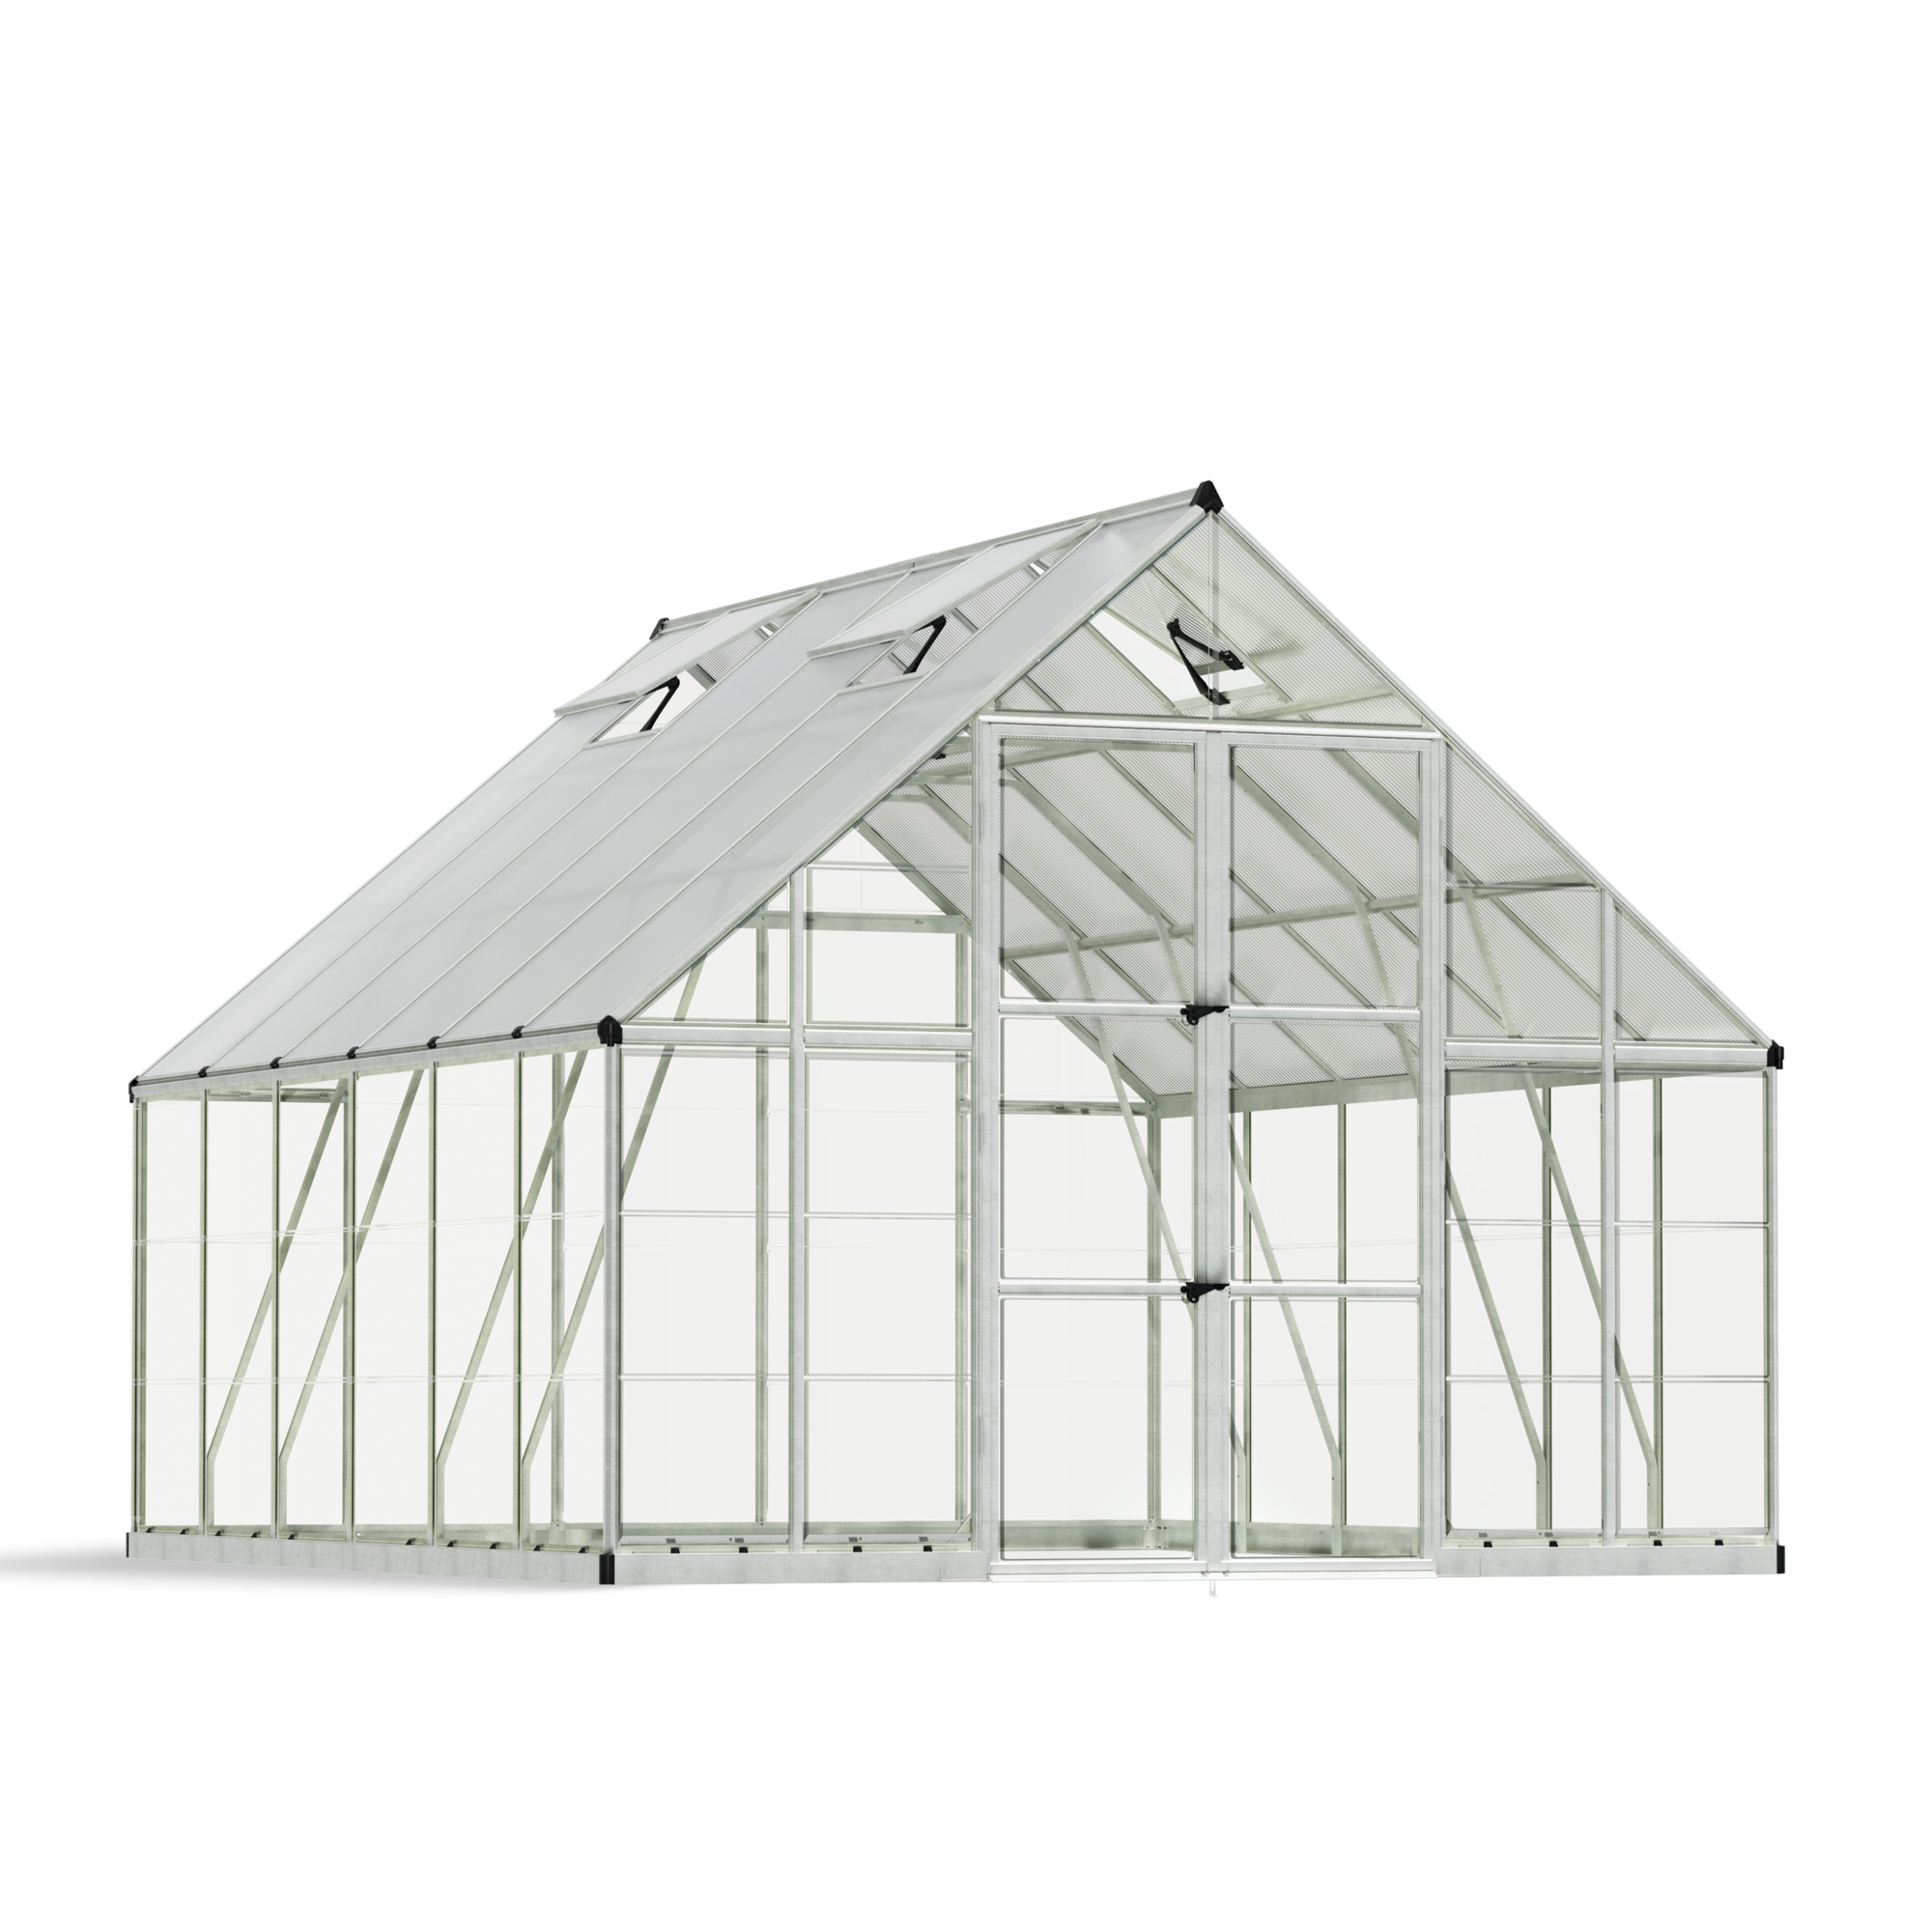 Poly-Tex Inc., Balance 10ft. x 12ft. Greenhouse - Silver, Length 145 in, Width 119.7 in, Center Height 101.2 in, Model 706963